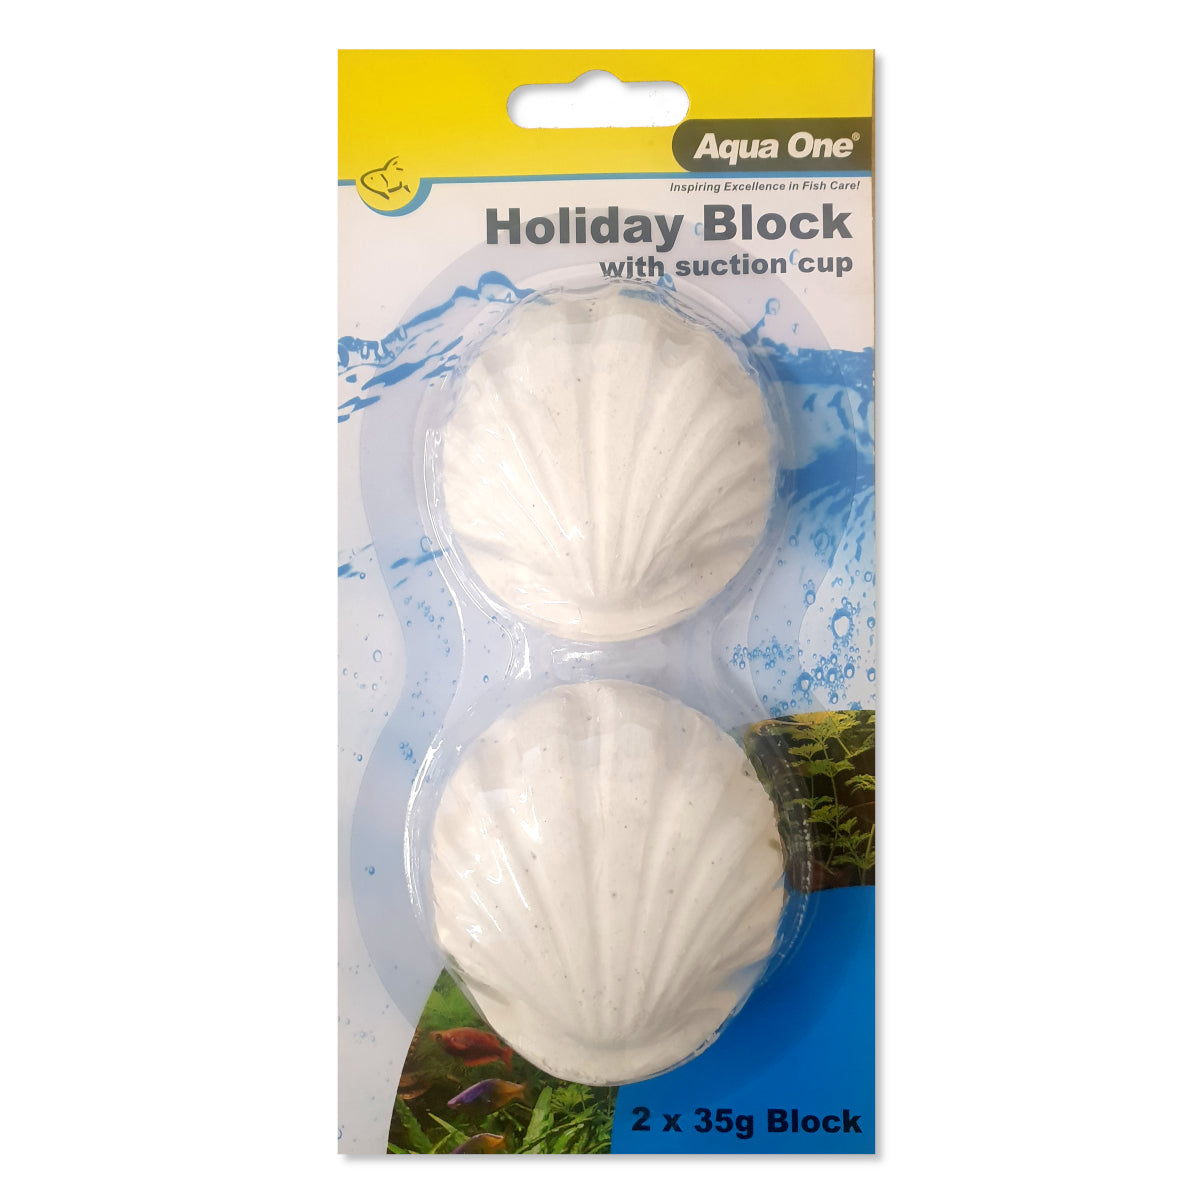 Aqua One Holiday Blocks 2 x 35g with Suction Cup 20 days